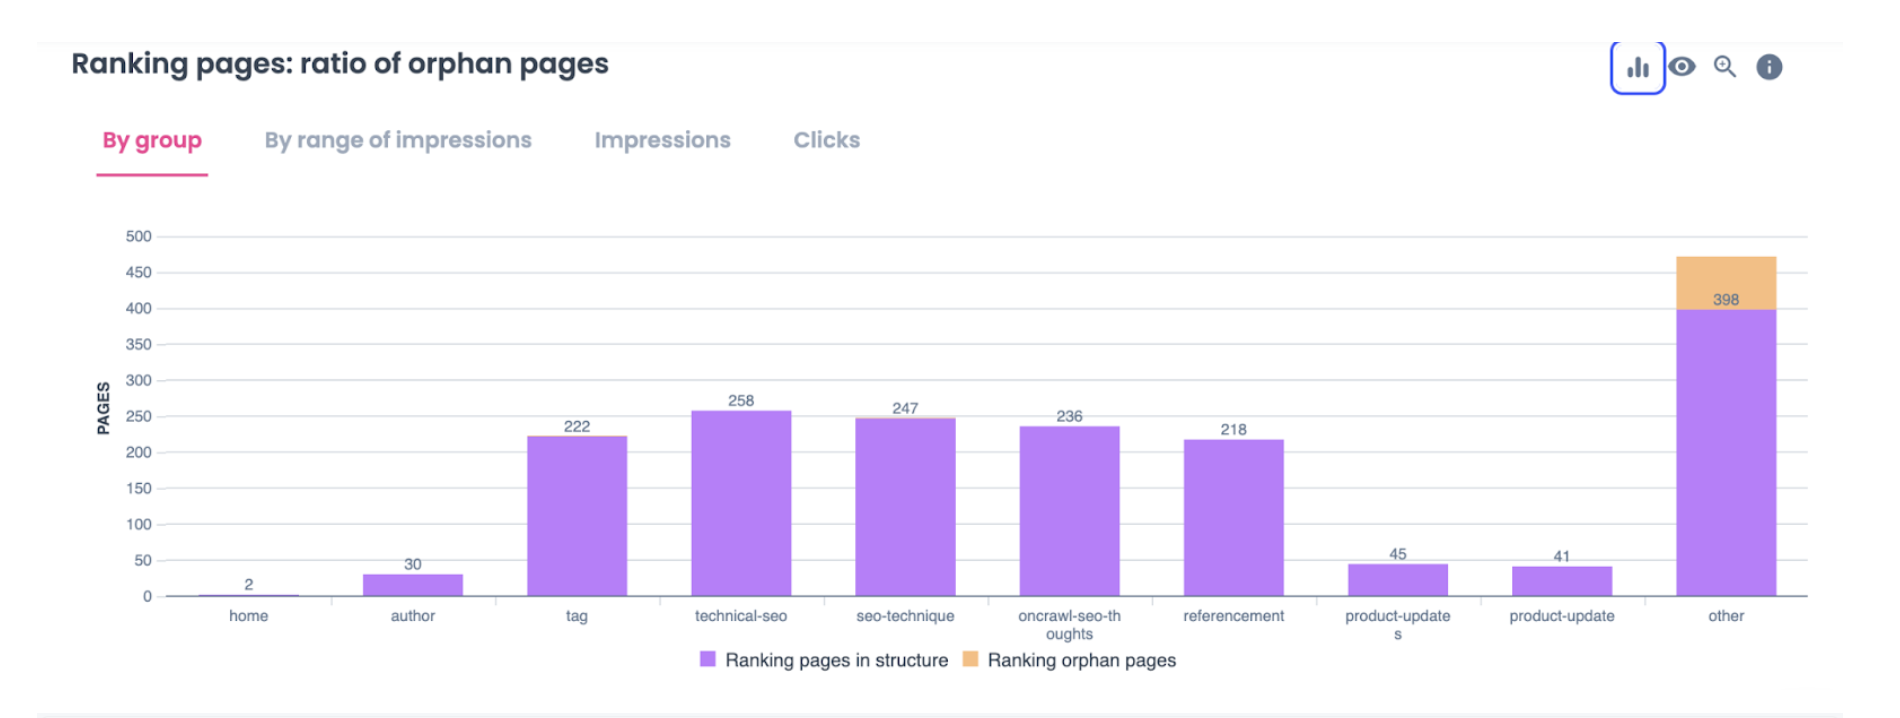 Ranking pages ratio of orphan pages